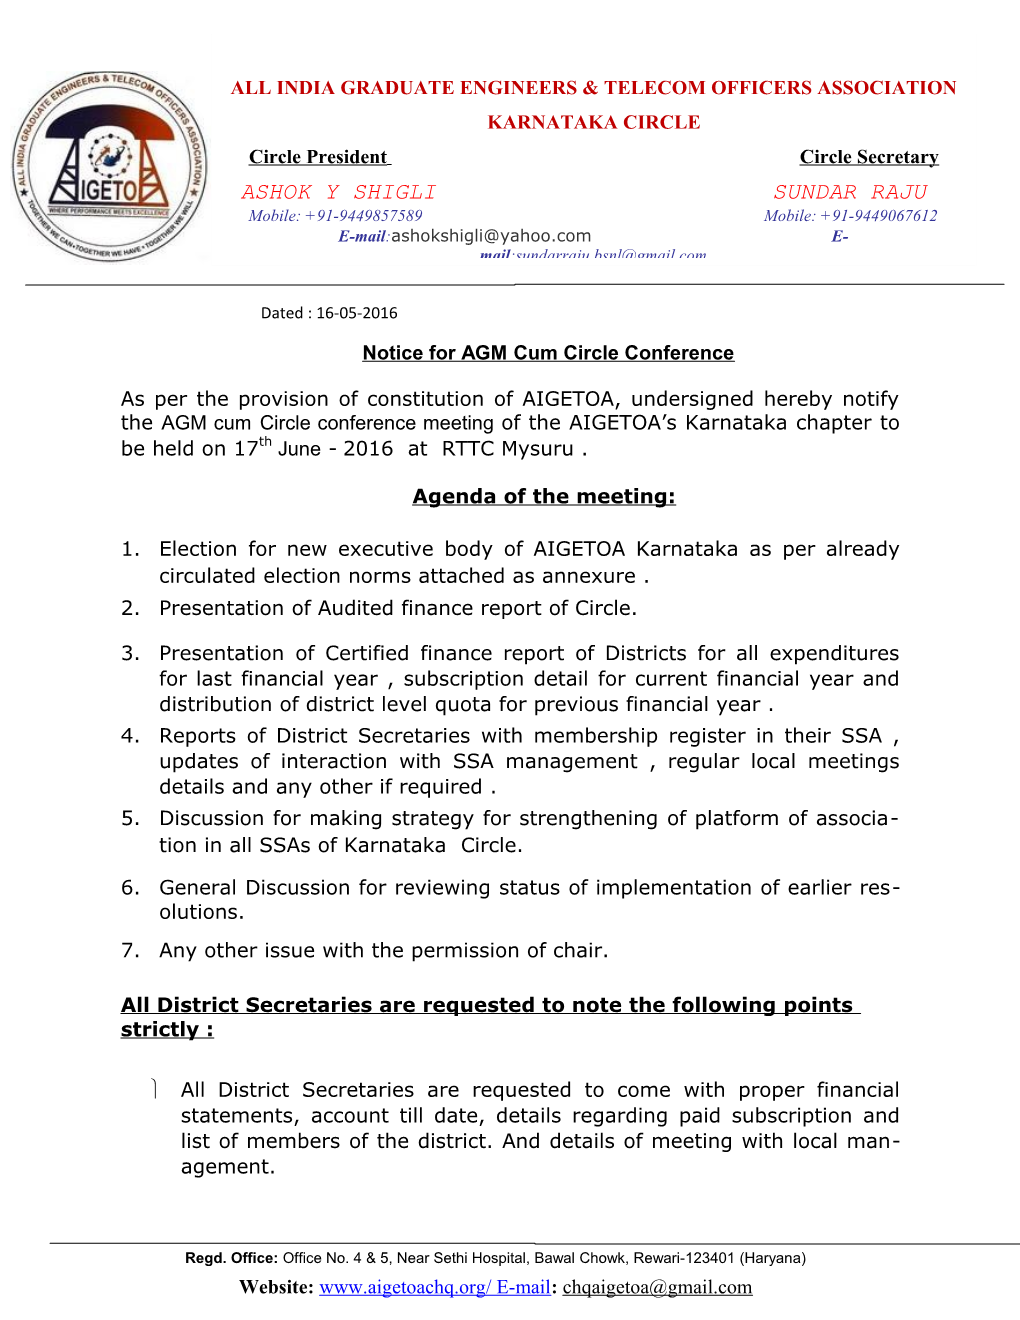 Notice for AGM Cum Circle Conference